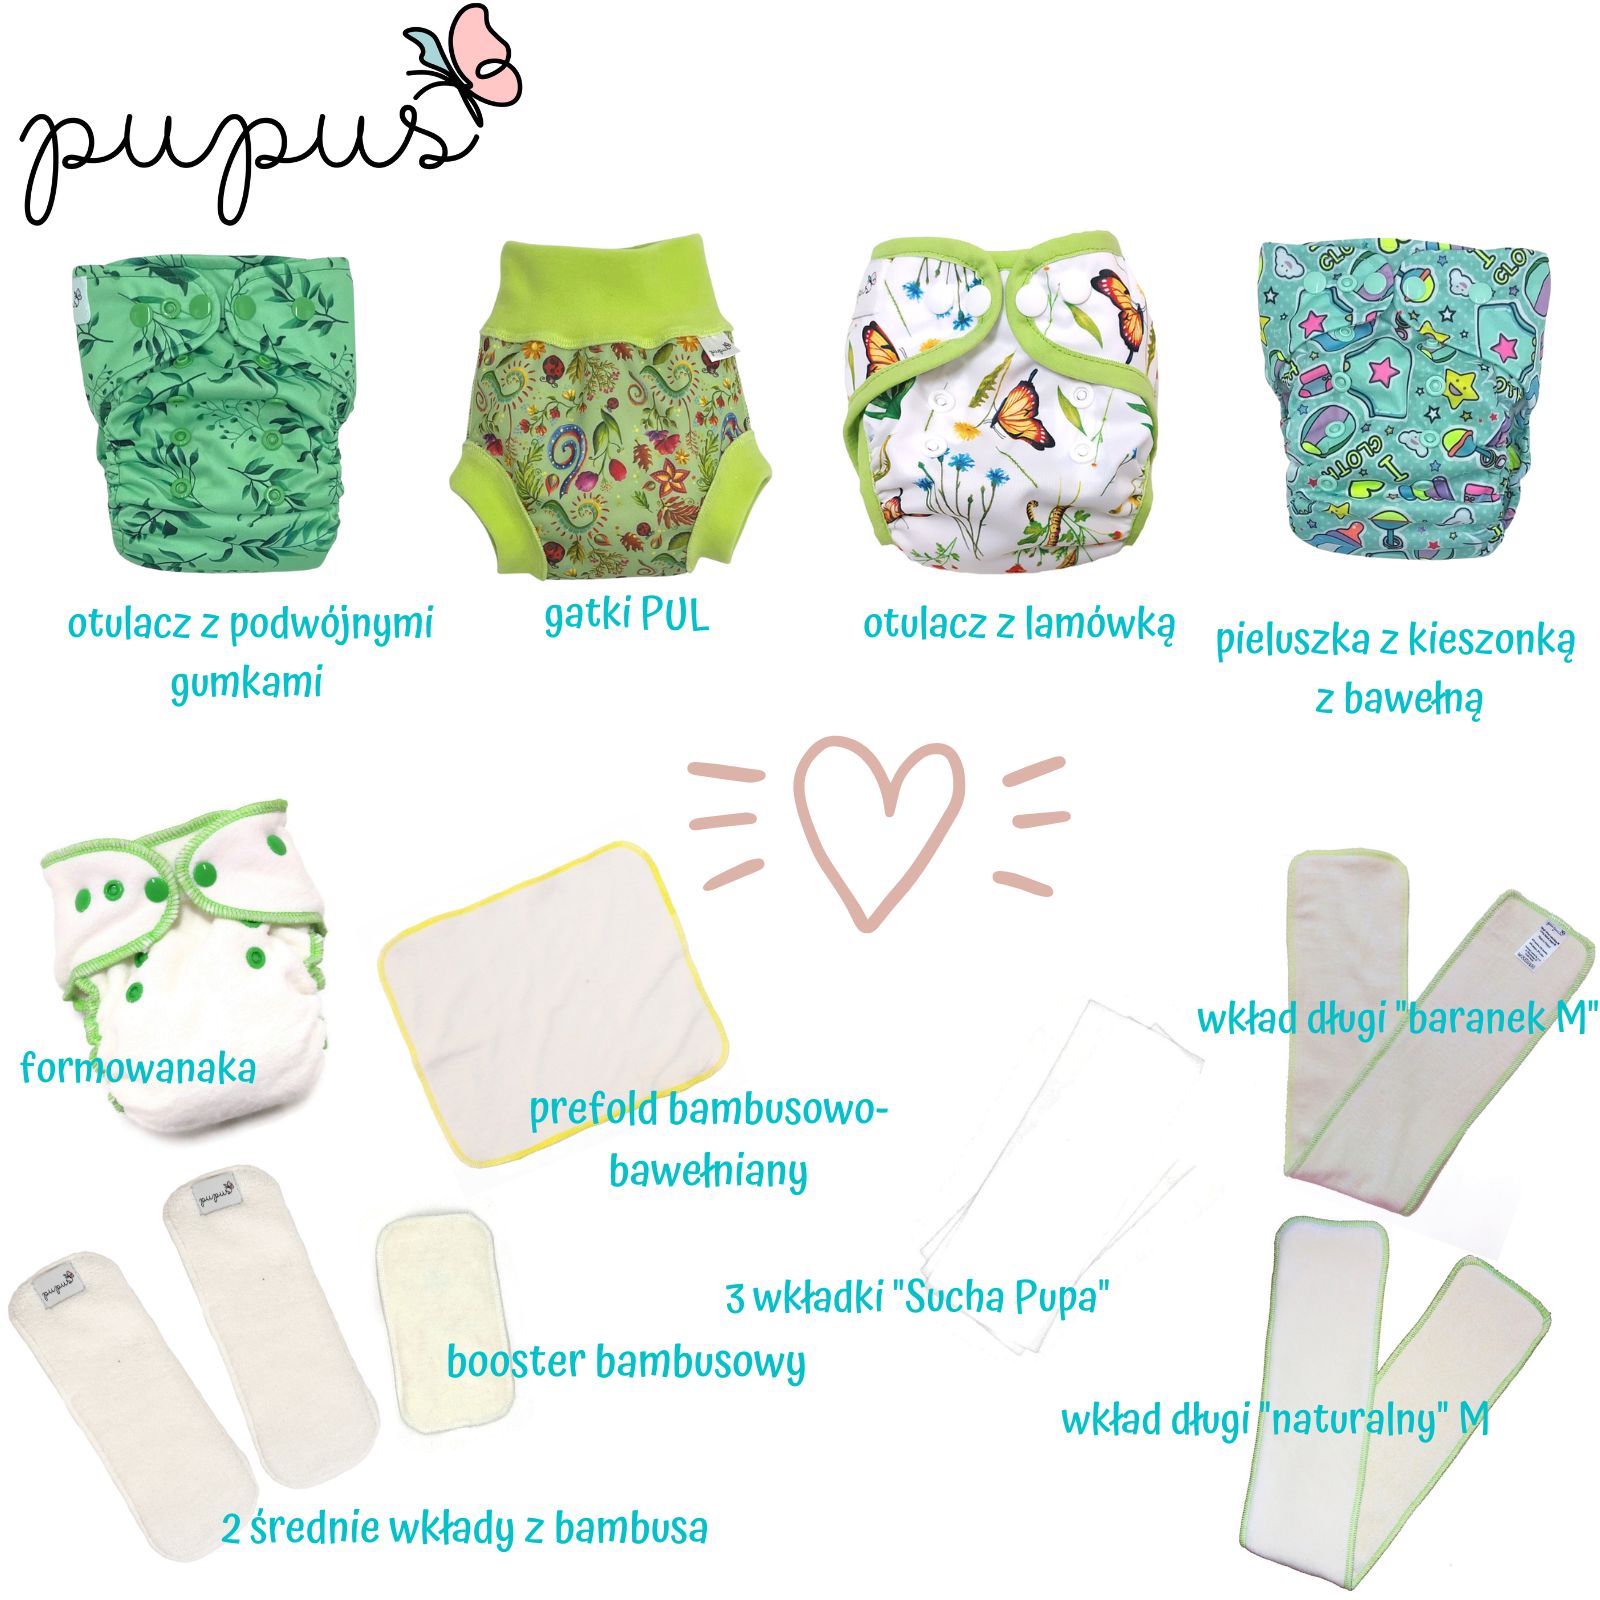 pampers active baby dry 4 90 sztuk